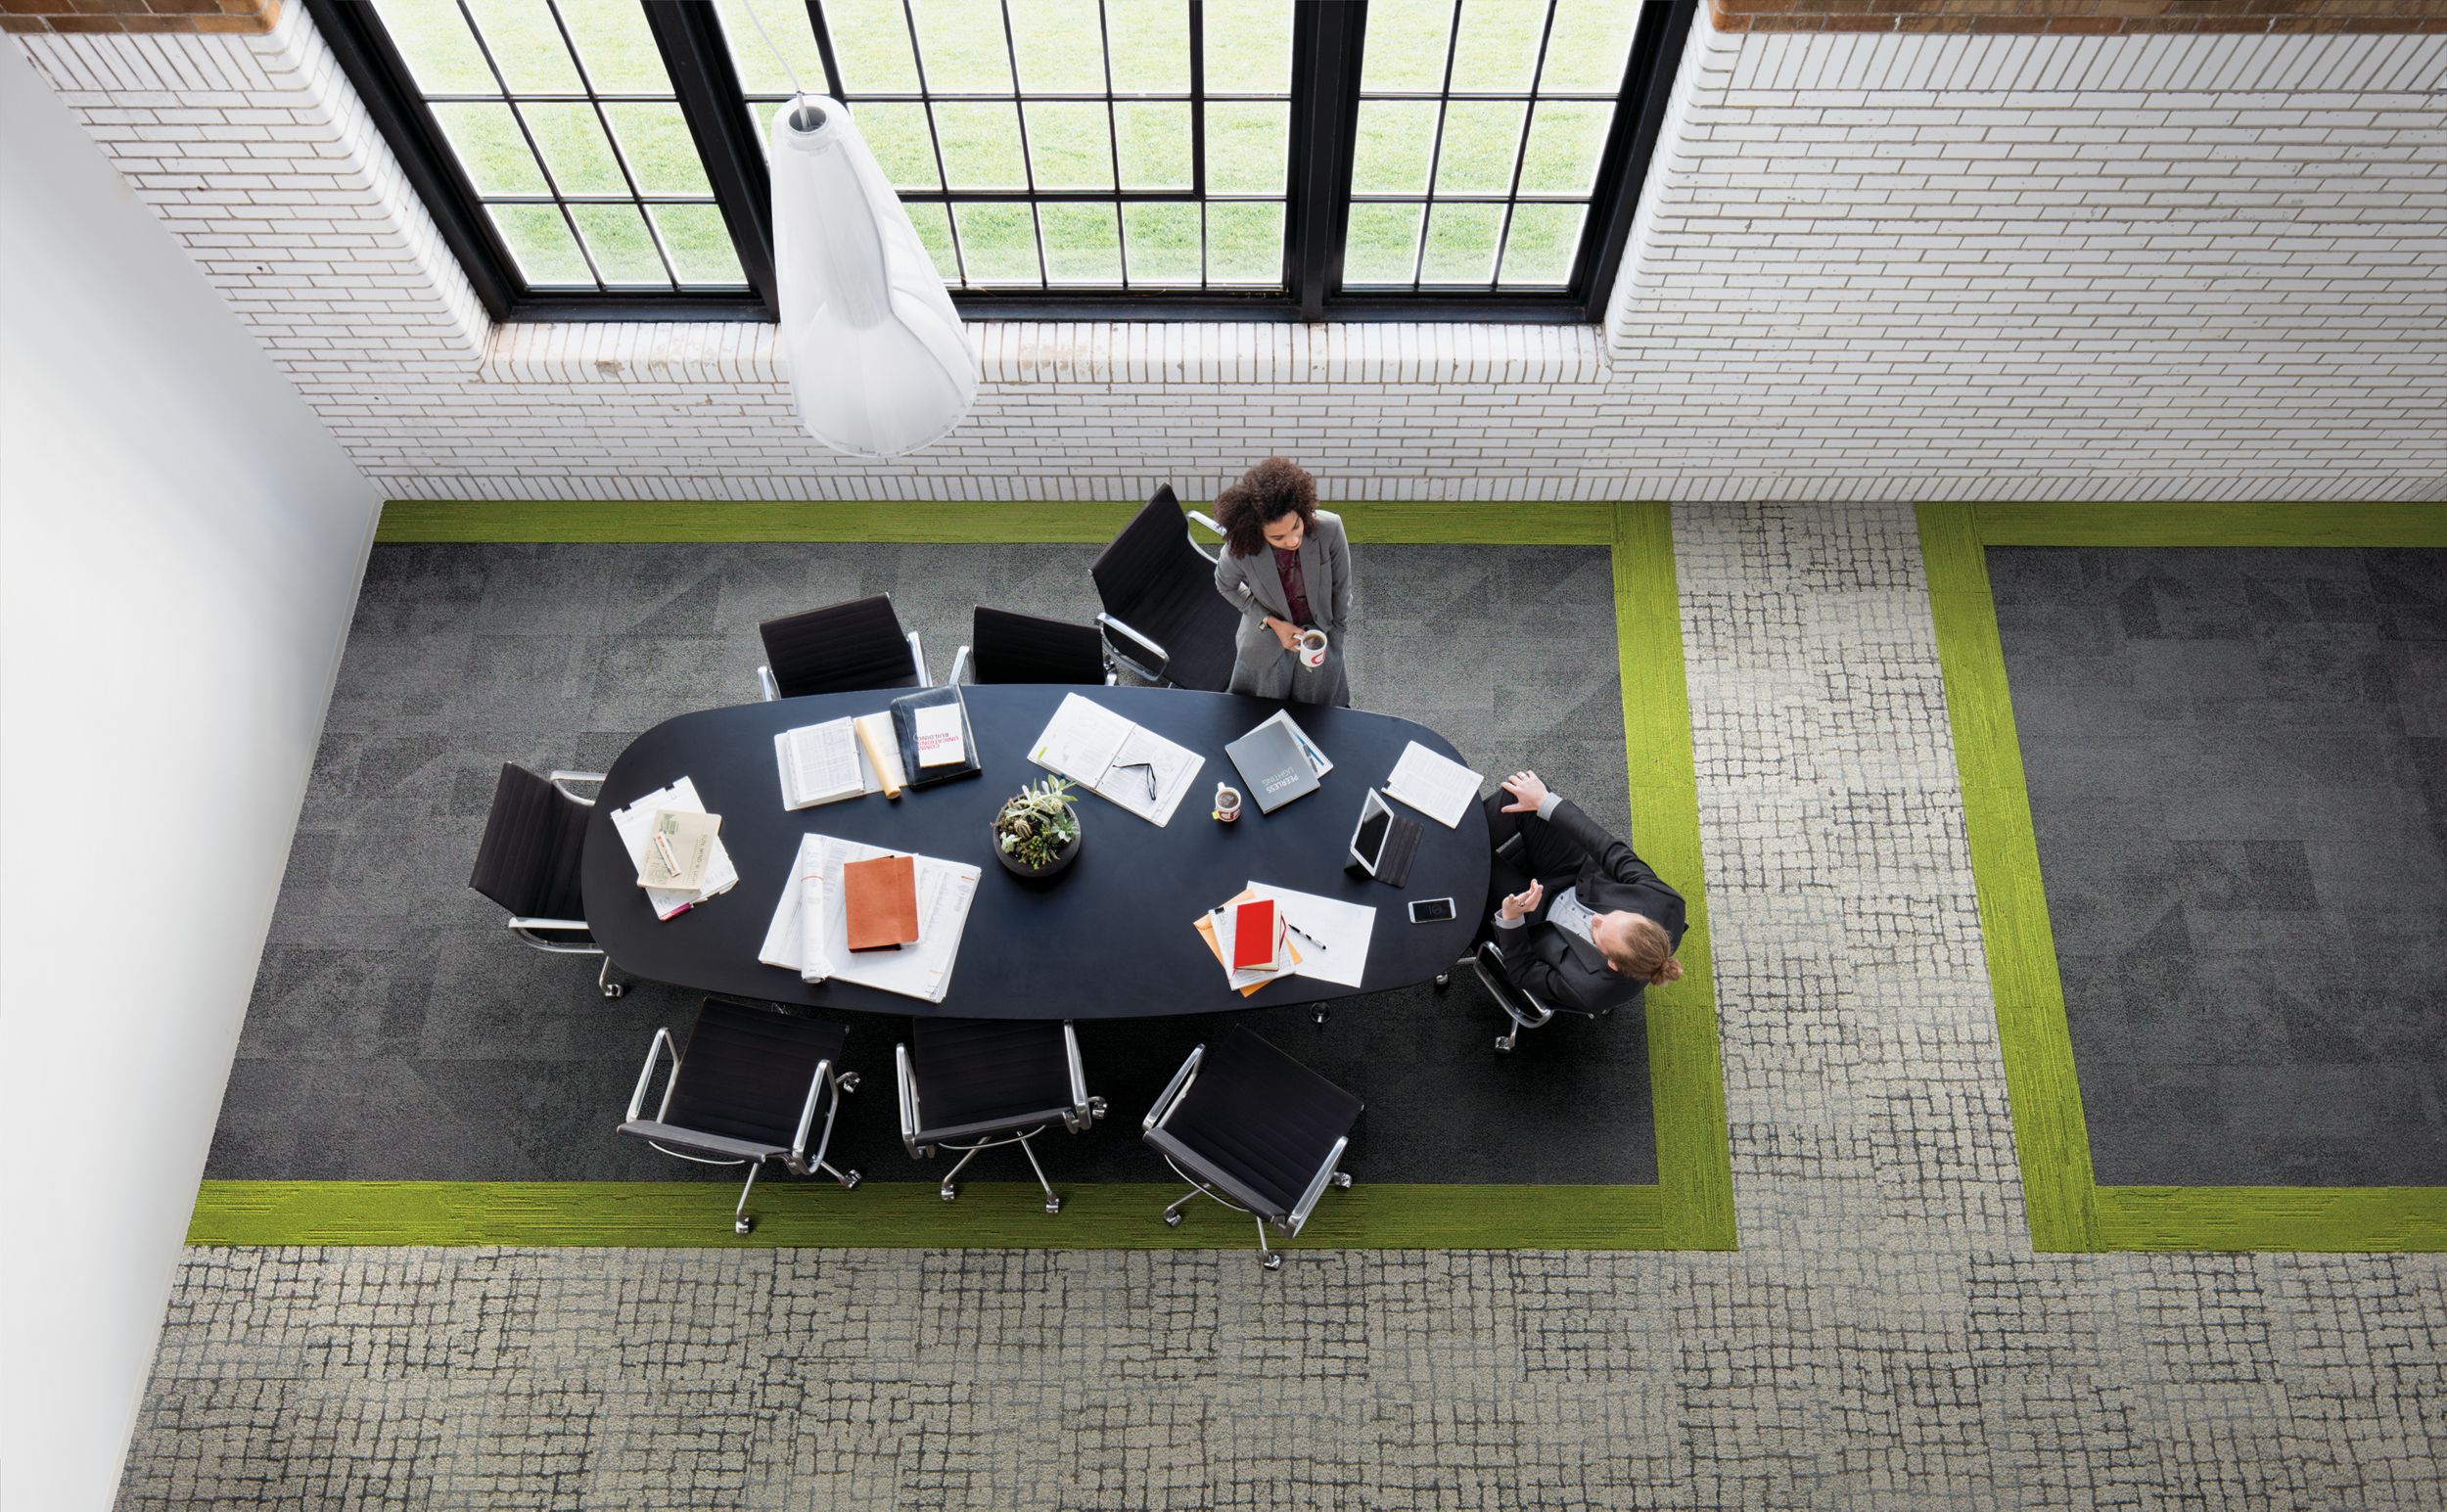 Interface Paver and Sett in Stone carpet tile with UR501 plank carpet tile in overhead view of meeting area with man and women conversating Bildnummer 6